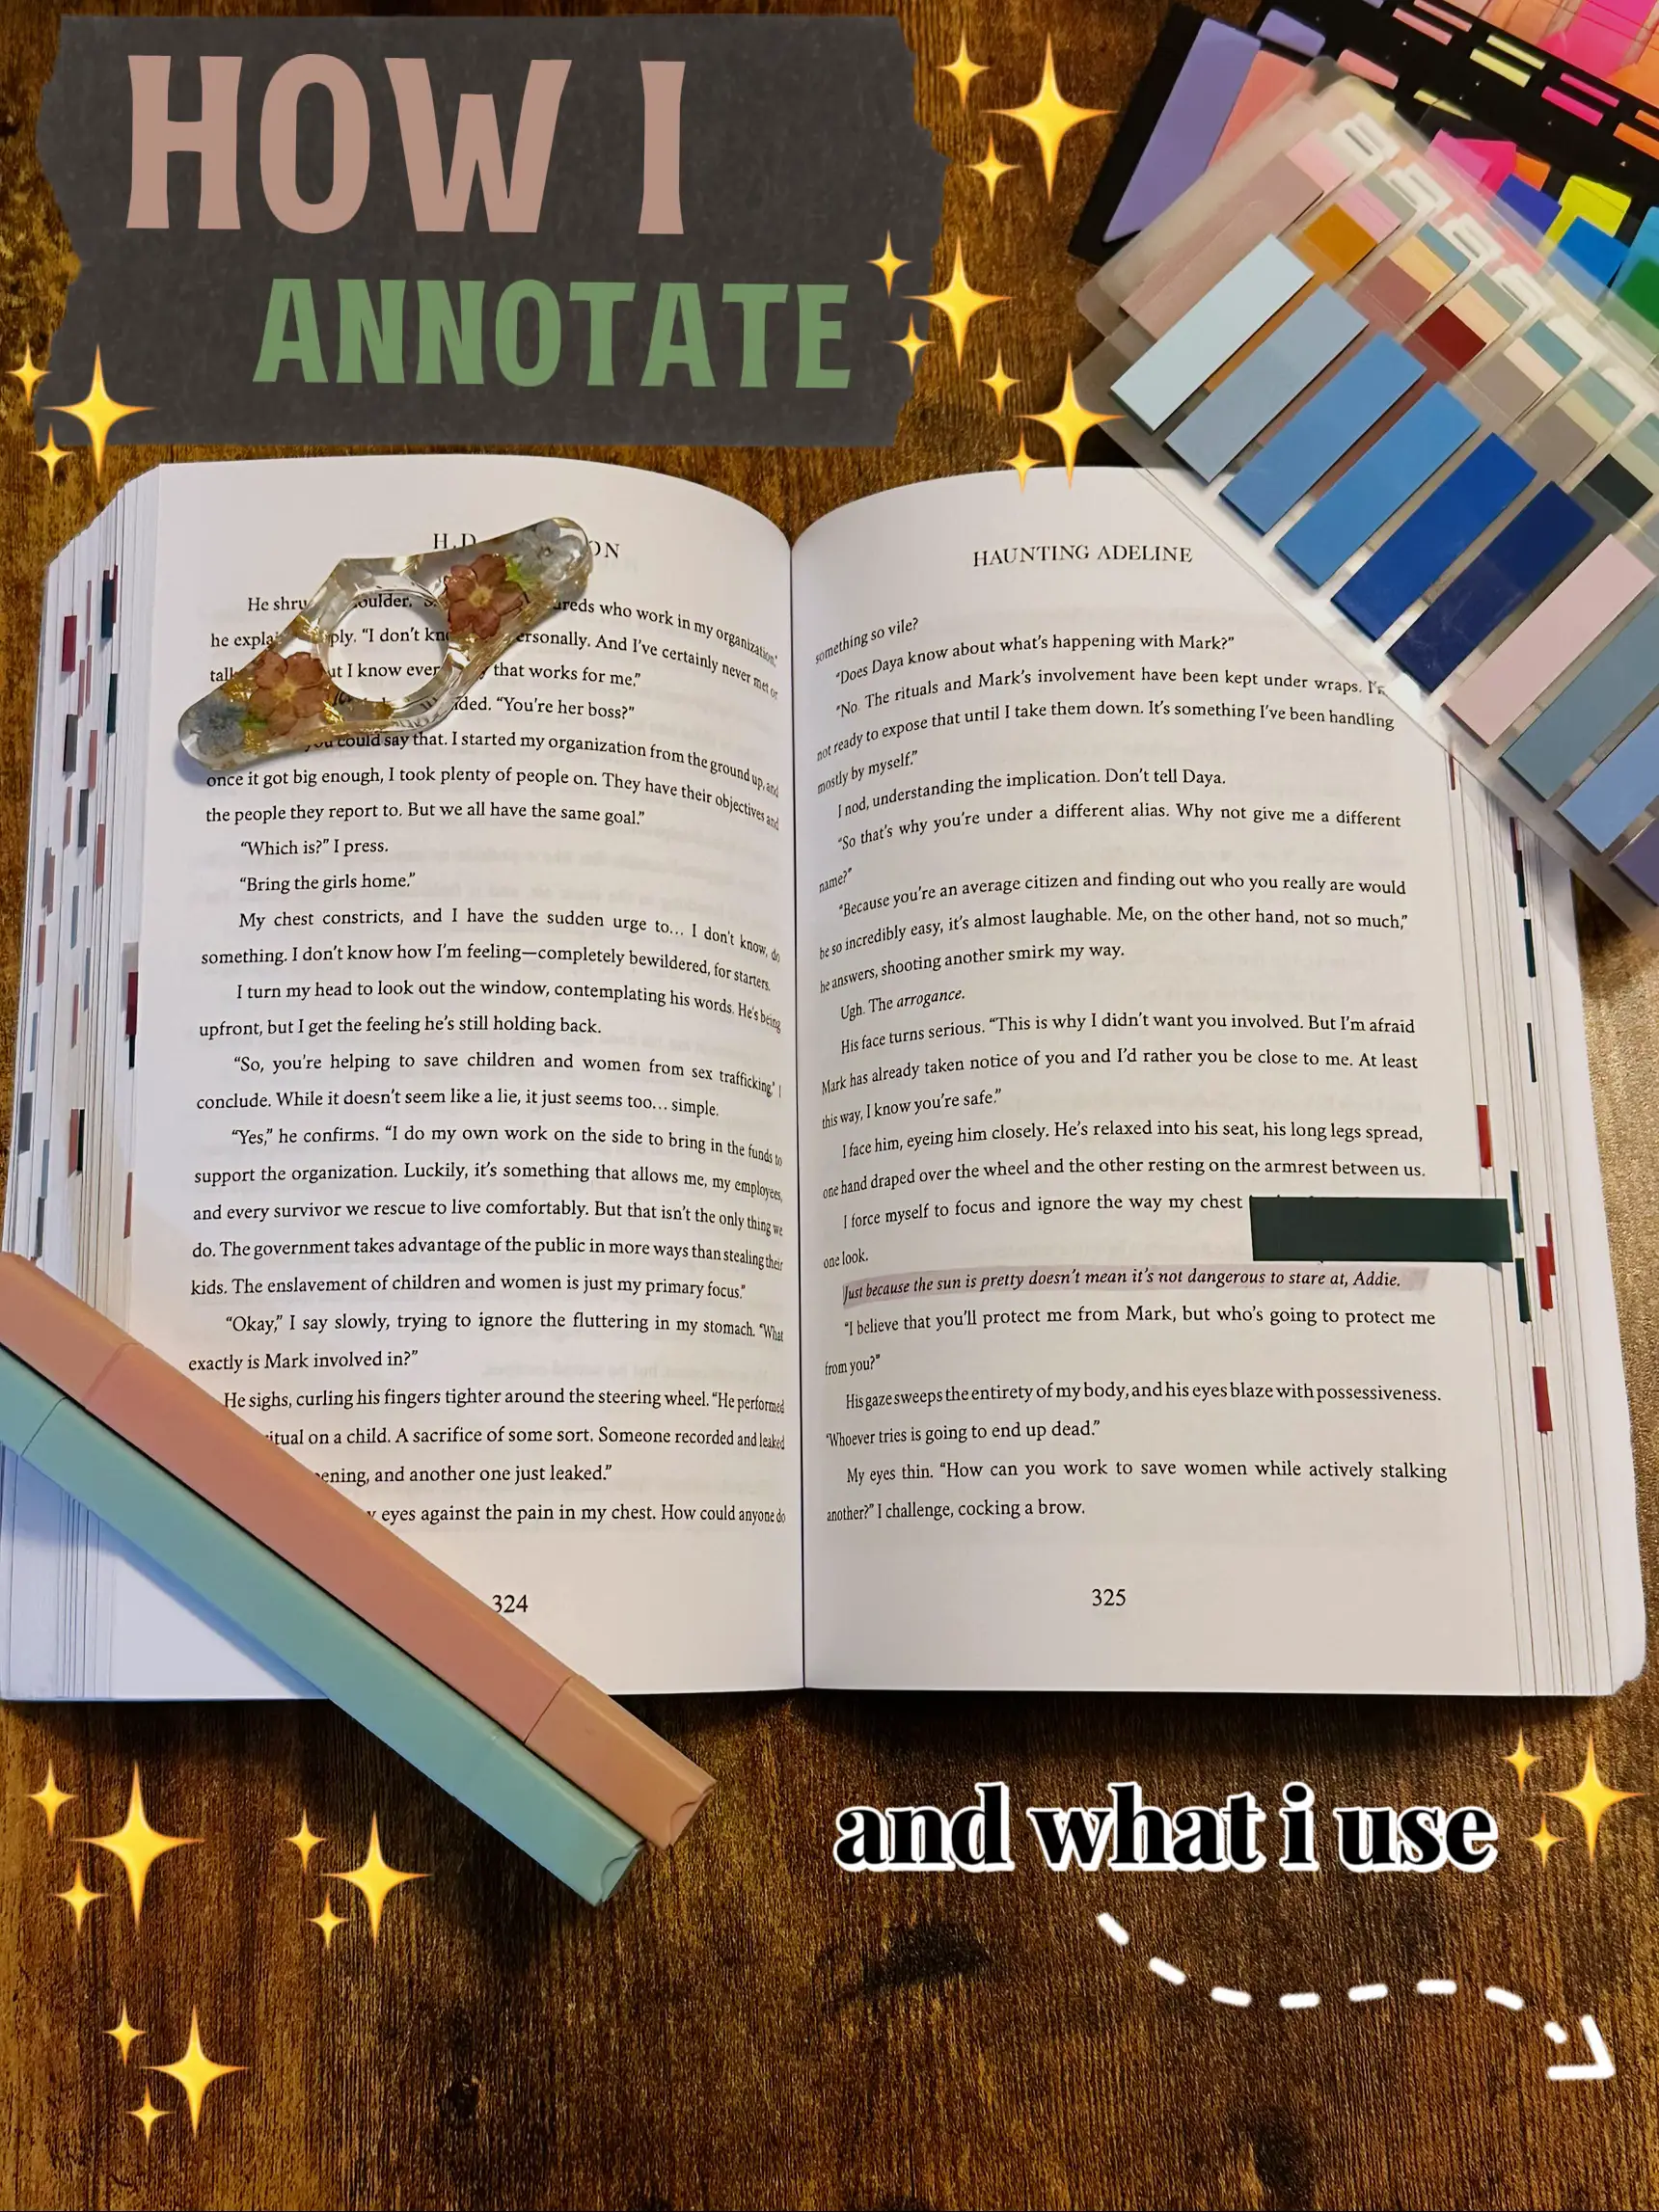 Here are my TOP 5 favorite products to annotate books- 👉 are you